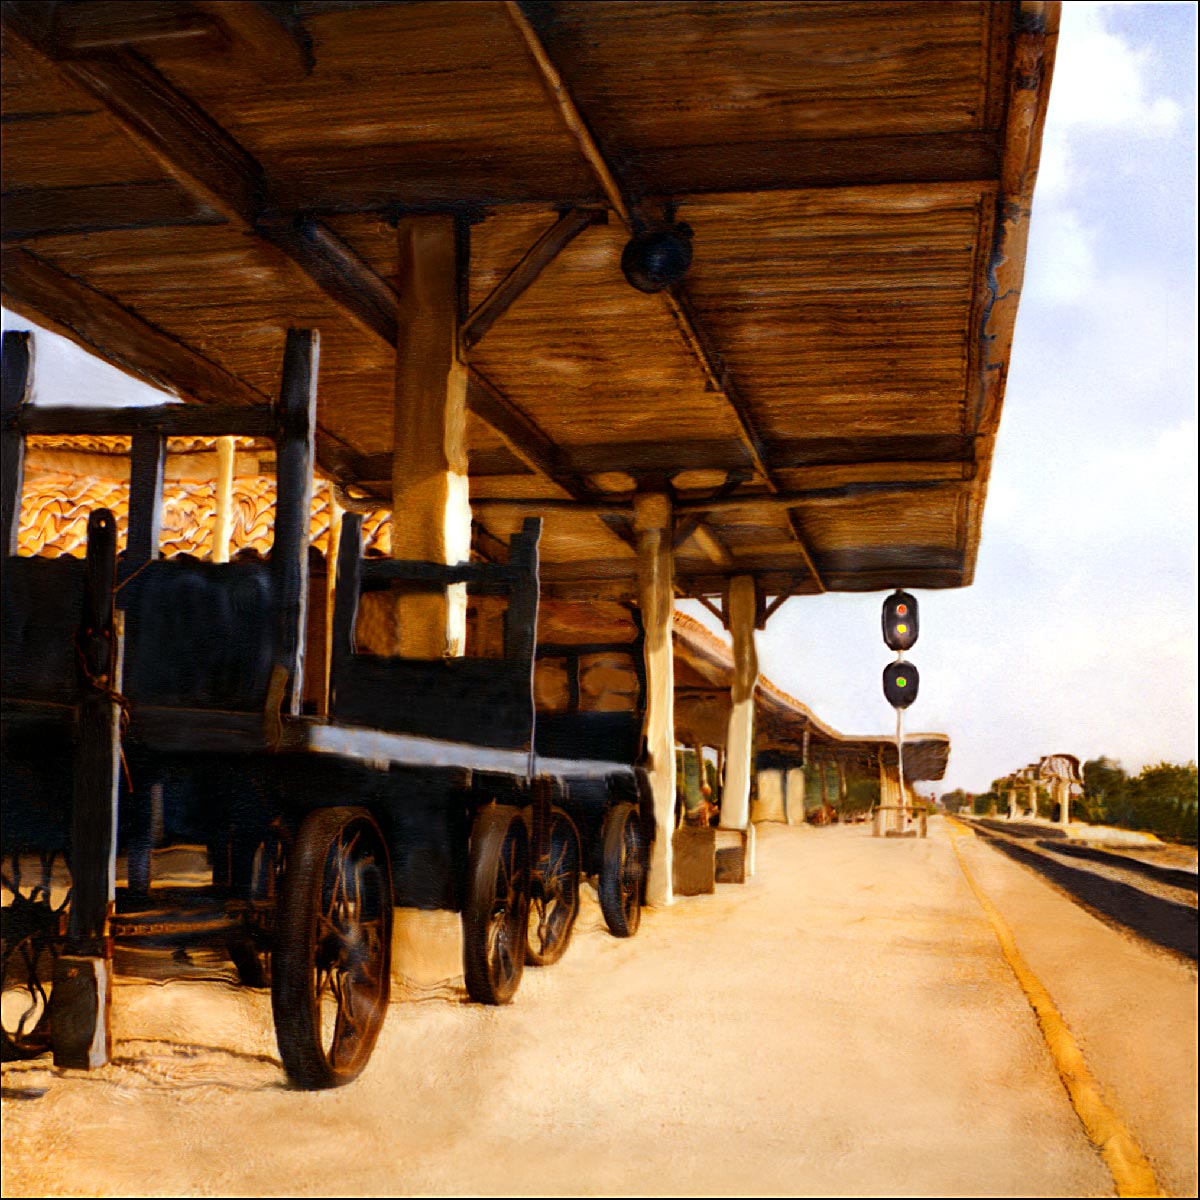 "Old Train Station" A Classic with Metal Wheeled Baggage Carts, Hollywood, FL